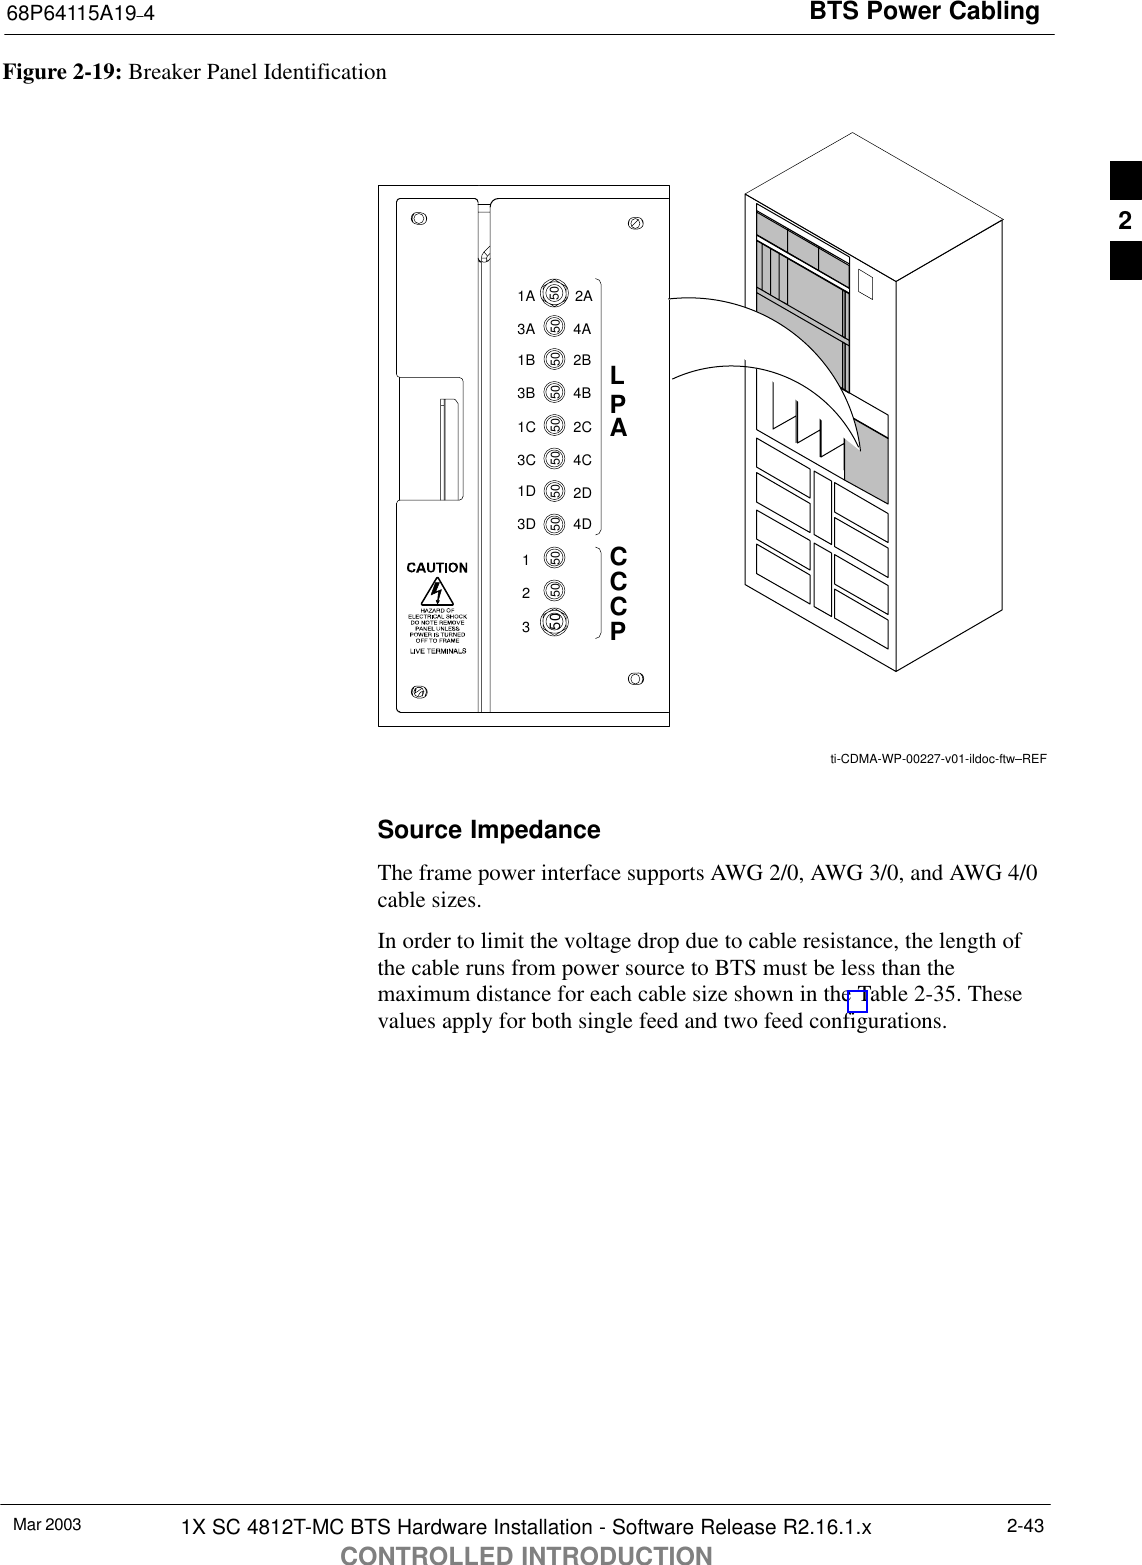 BTS Power Cabling68P64115A19–4Mar 2003 1X SC 4812T-MC BTS Hardware Installation - Software Release R2.16.1.xCONTROLLED INTRODUCTION2-43Figure 2-19: Breaker Panel Identificationti-CDMA-WP-00227-v01-ildoc-ftw–REFLPACCCP2A4A2B4B2C4C2D4D1A3A1B3B1C3C1D3D5012350 50 50 50 50 50 50 50 50 50Source ImpedanceThe frame power interface supports AWG 2/0, AWG 3/0, and AWG 4/0cable sizes.In order to limit the voltage drop due to cable resistance, the length ofthe cable runs from power source to BTS must be less than themaximum distance for each cable size shown in the Table 2-35. Thesevalues apply for both single feed and two feed configurations.2